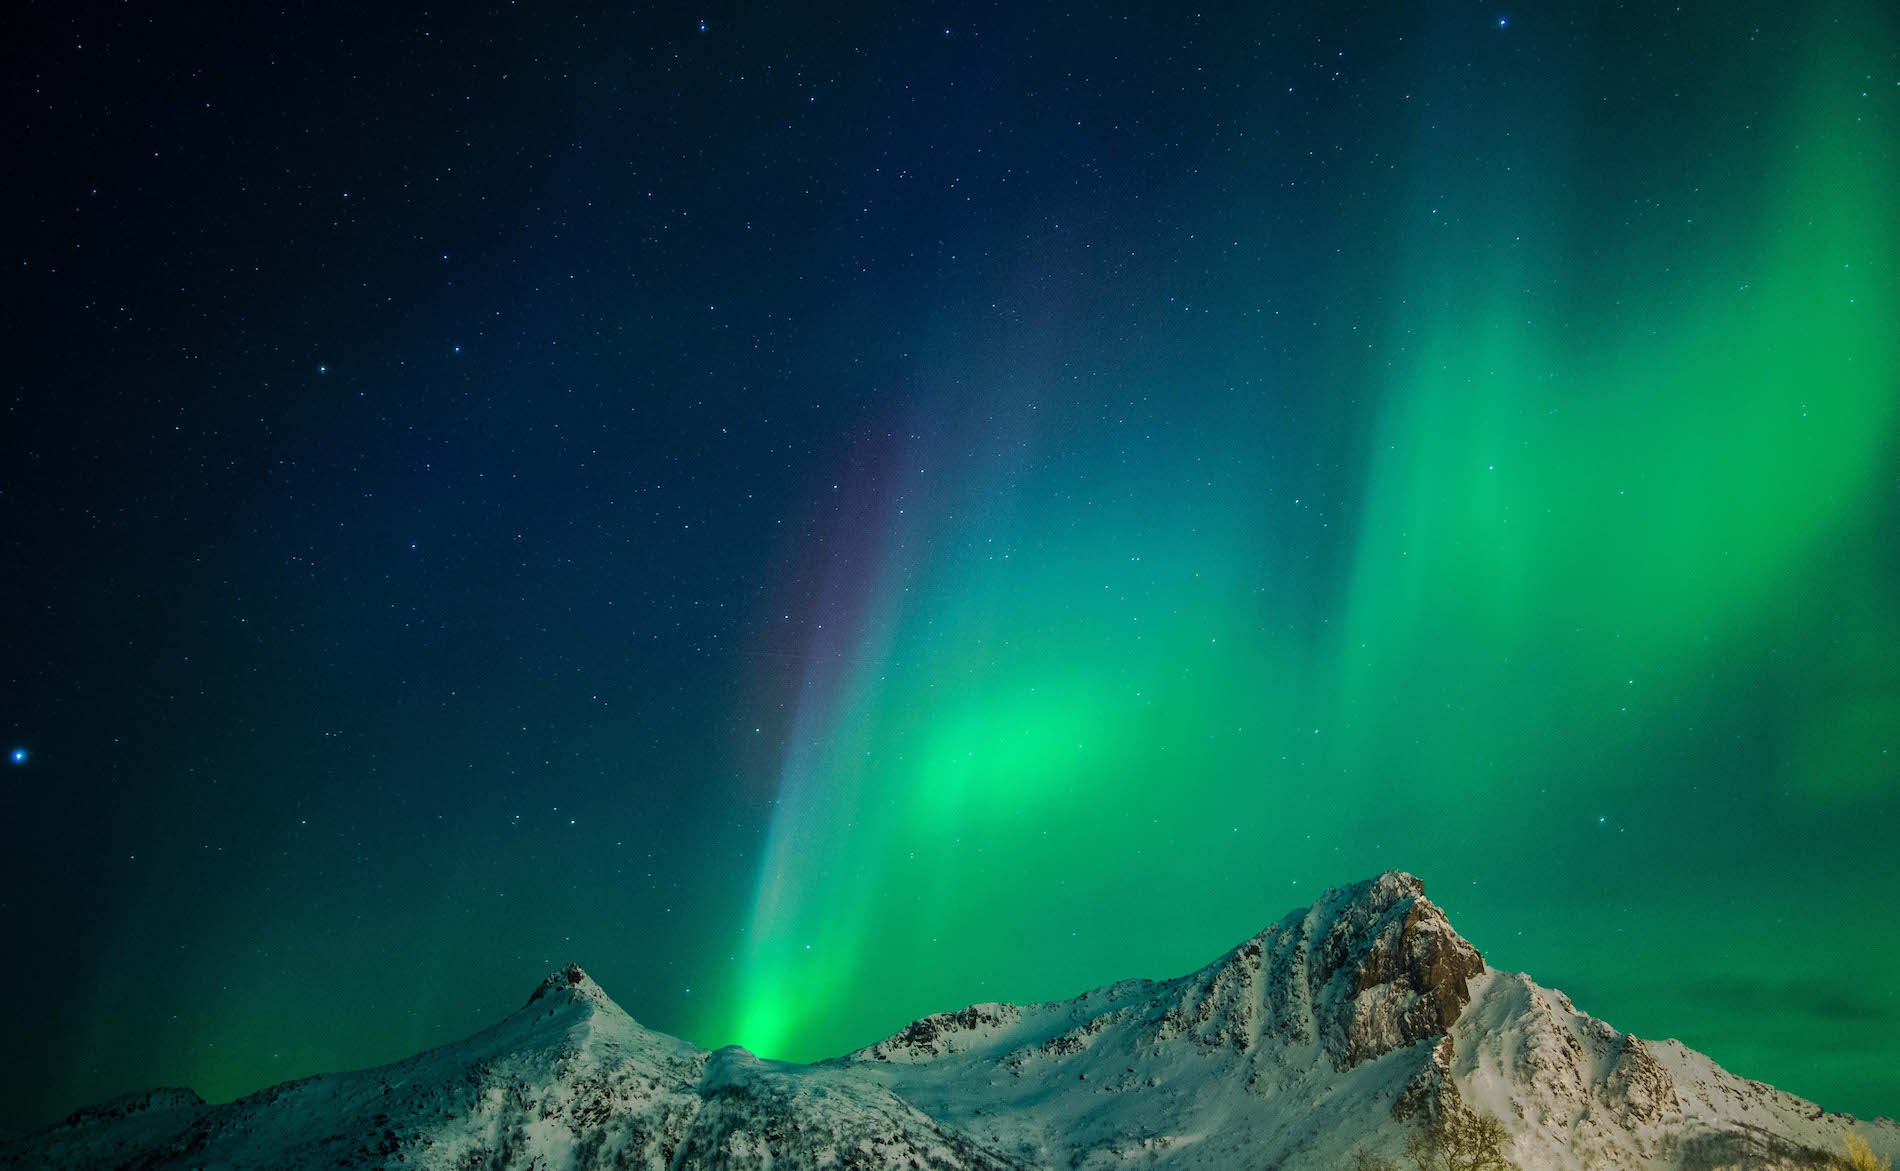 The Northern Lights, as photographed by Yamuna Phal.